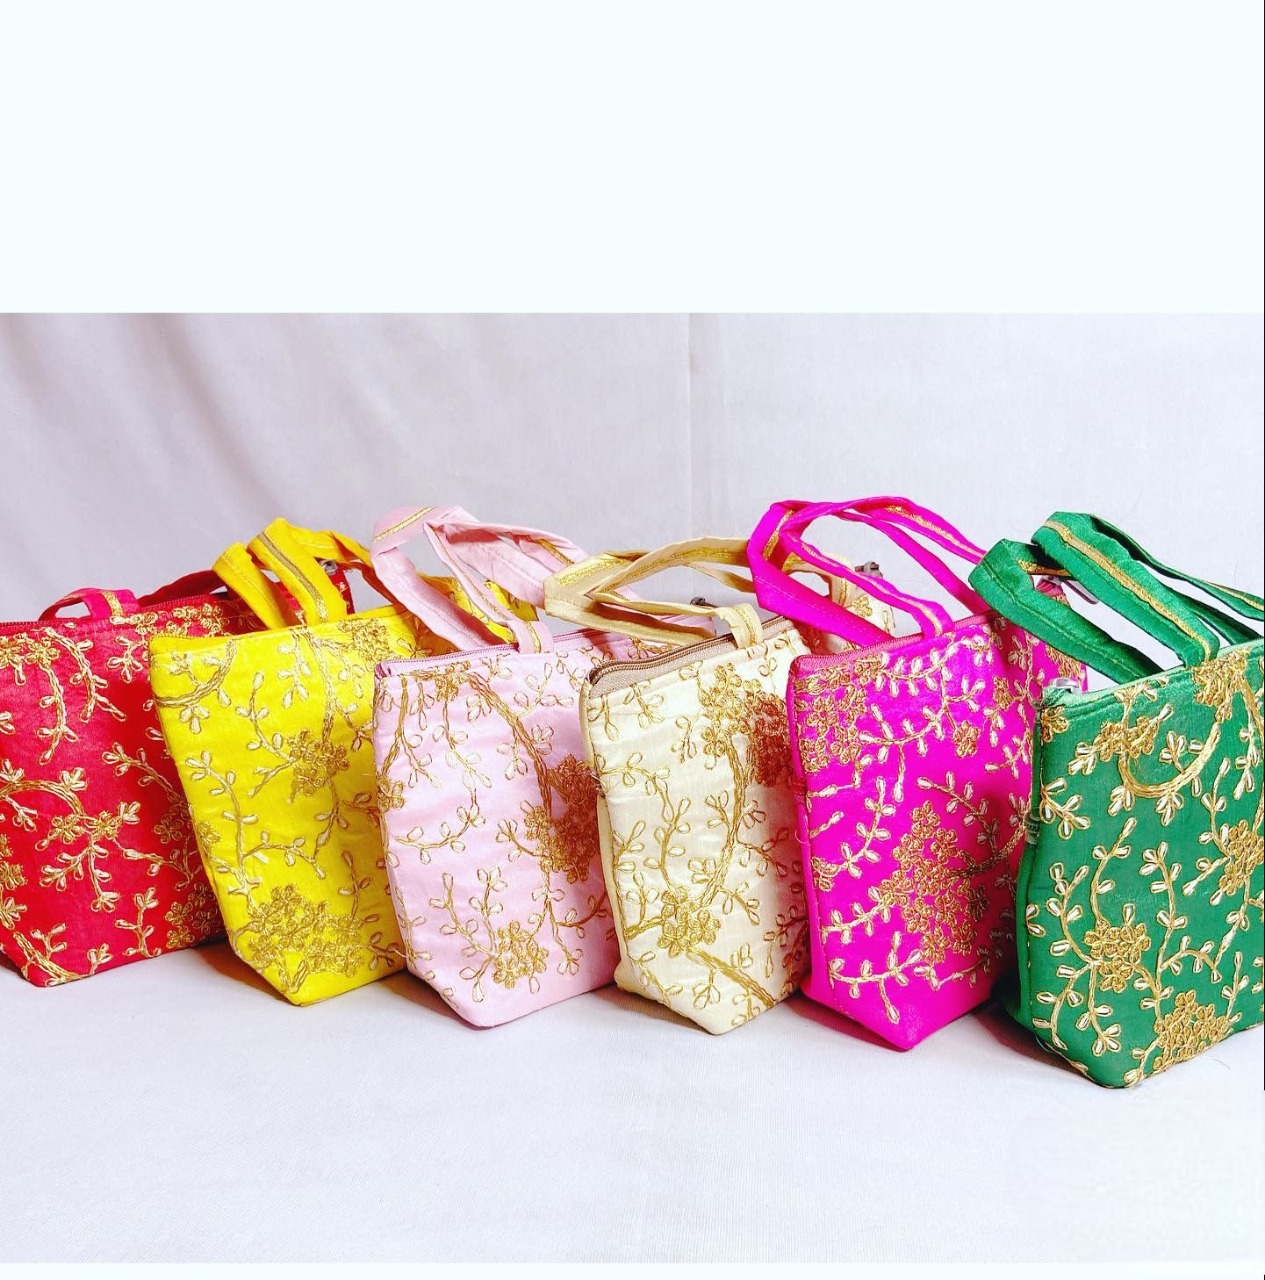 Buy Reusable Cloth Bags in India Online | Gift, Fridge Bags at Best Price –  Stonesoup Shop